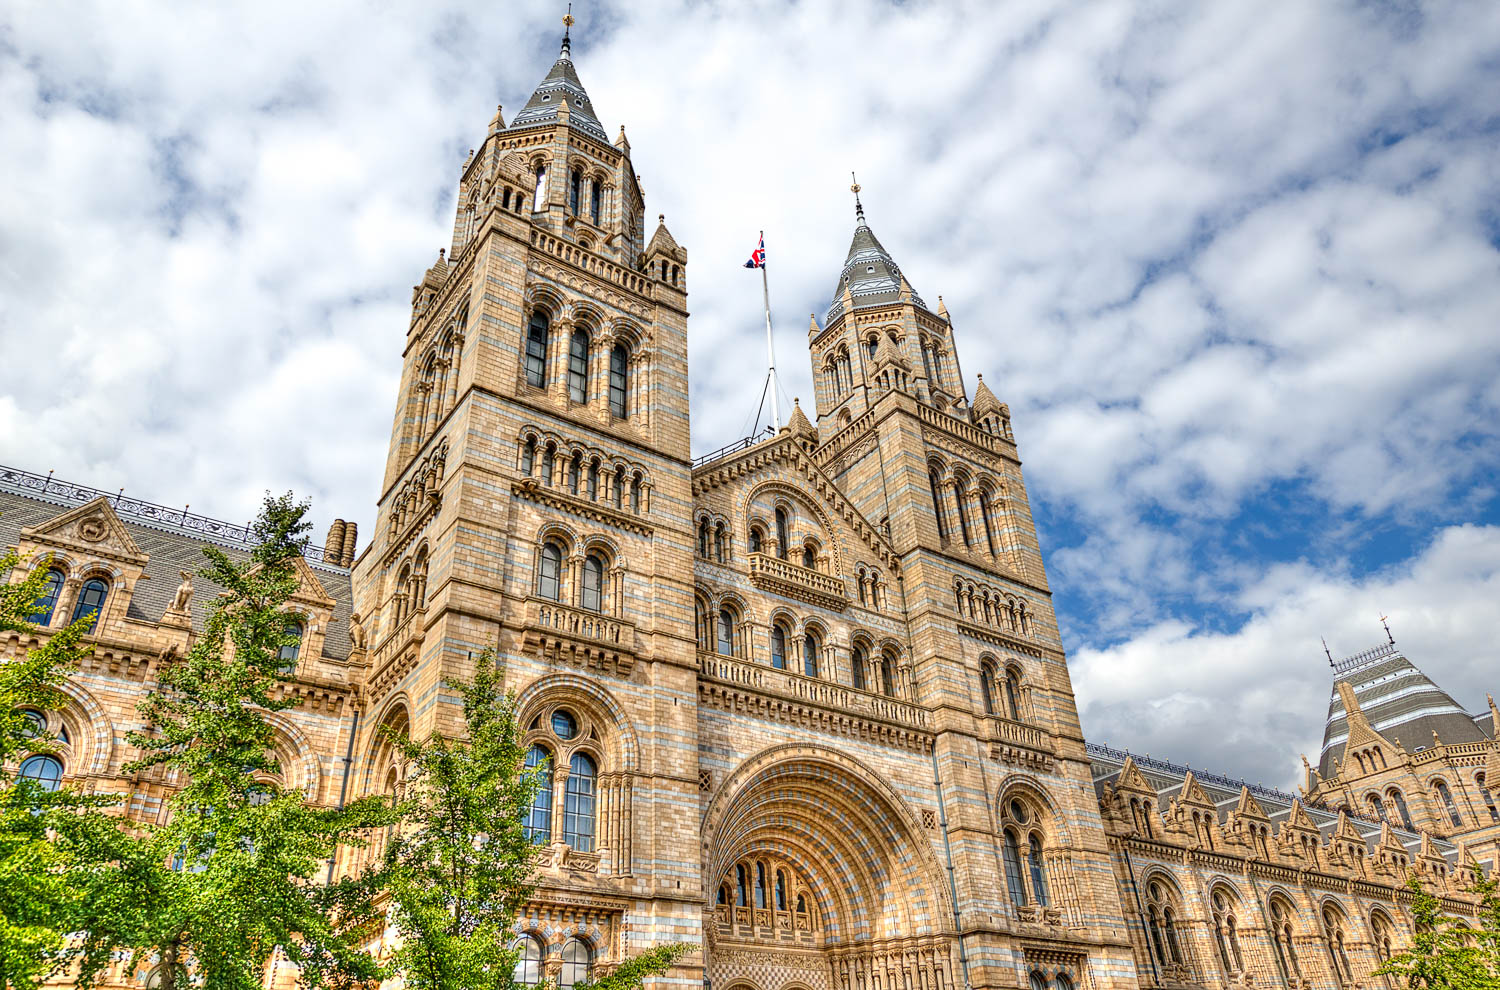 Exterior of the National History Museum in South Kensington - one of the locations from the first Paddington movie in London